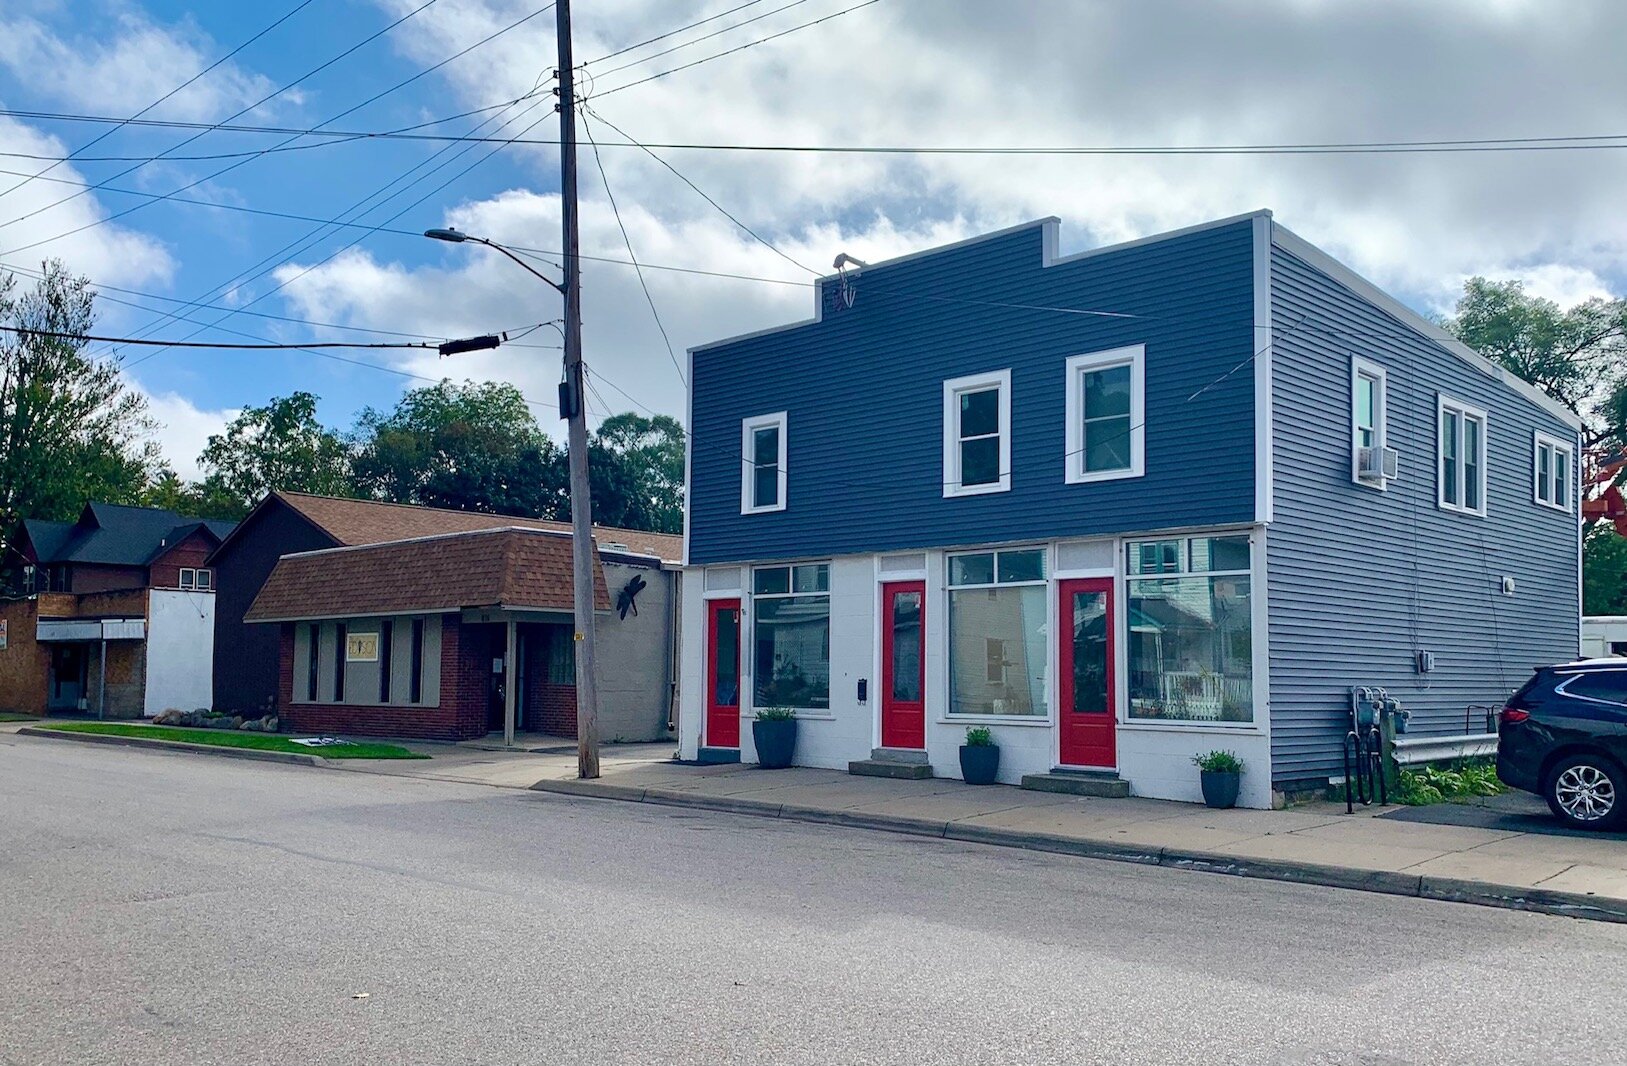  The Edison Neighborhood Association, whose 816 Washington Ave. offices are shown at left, is in the throes of renovating the former Bob’s Barber building, right.